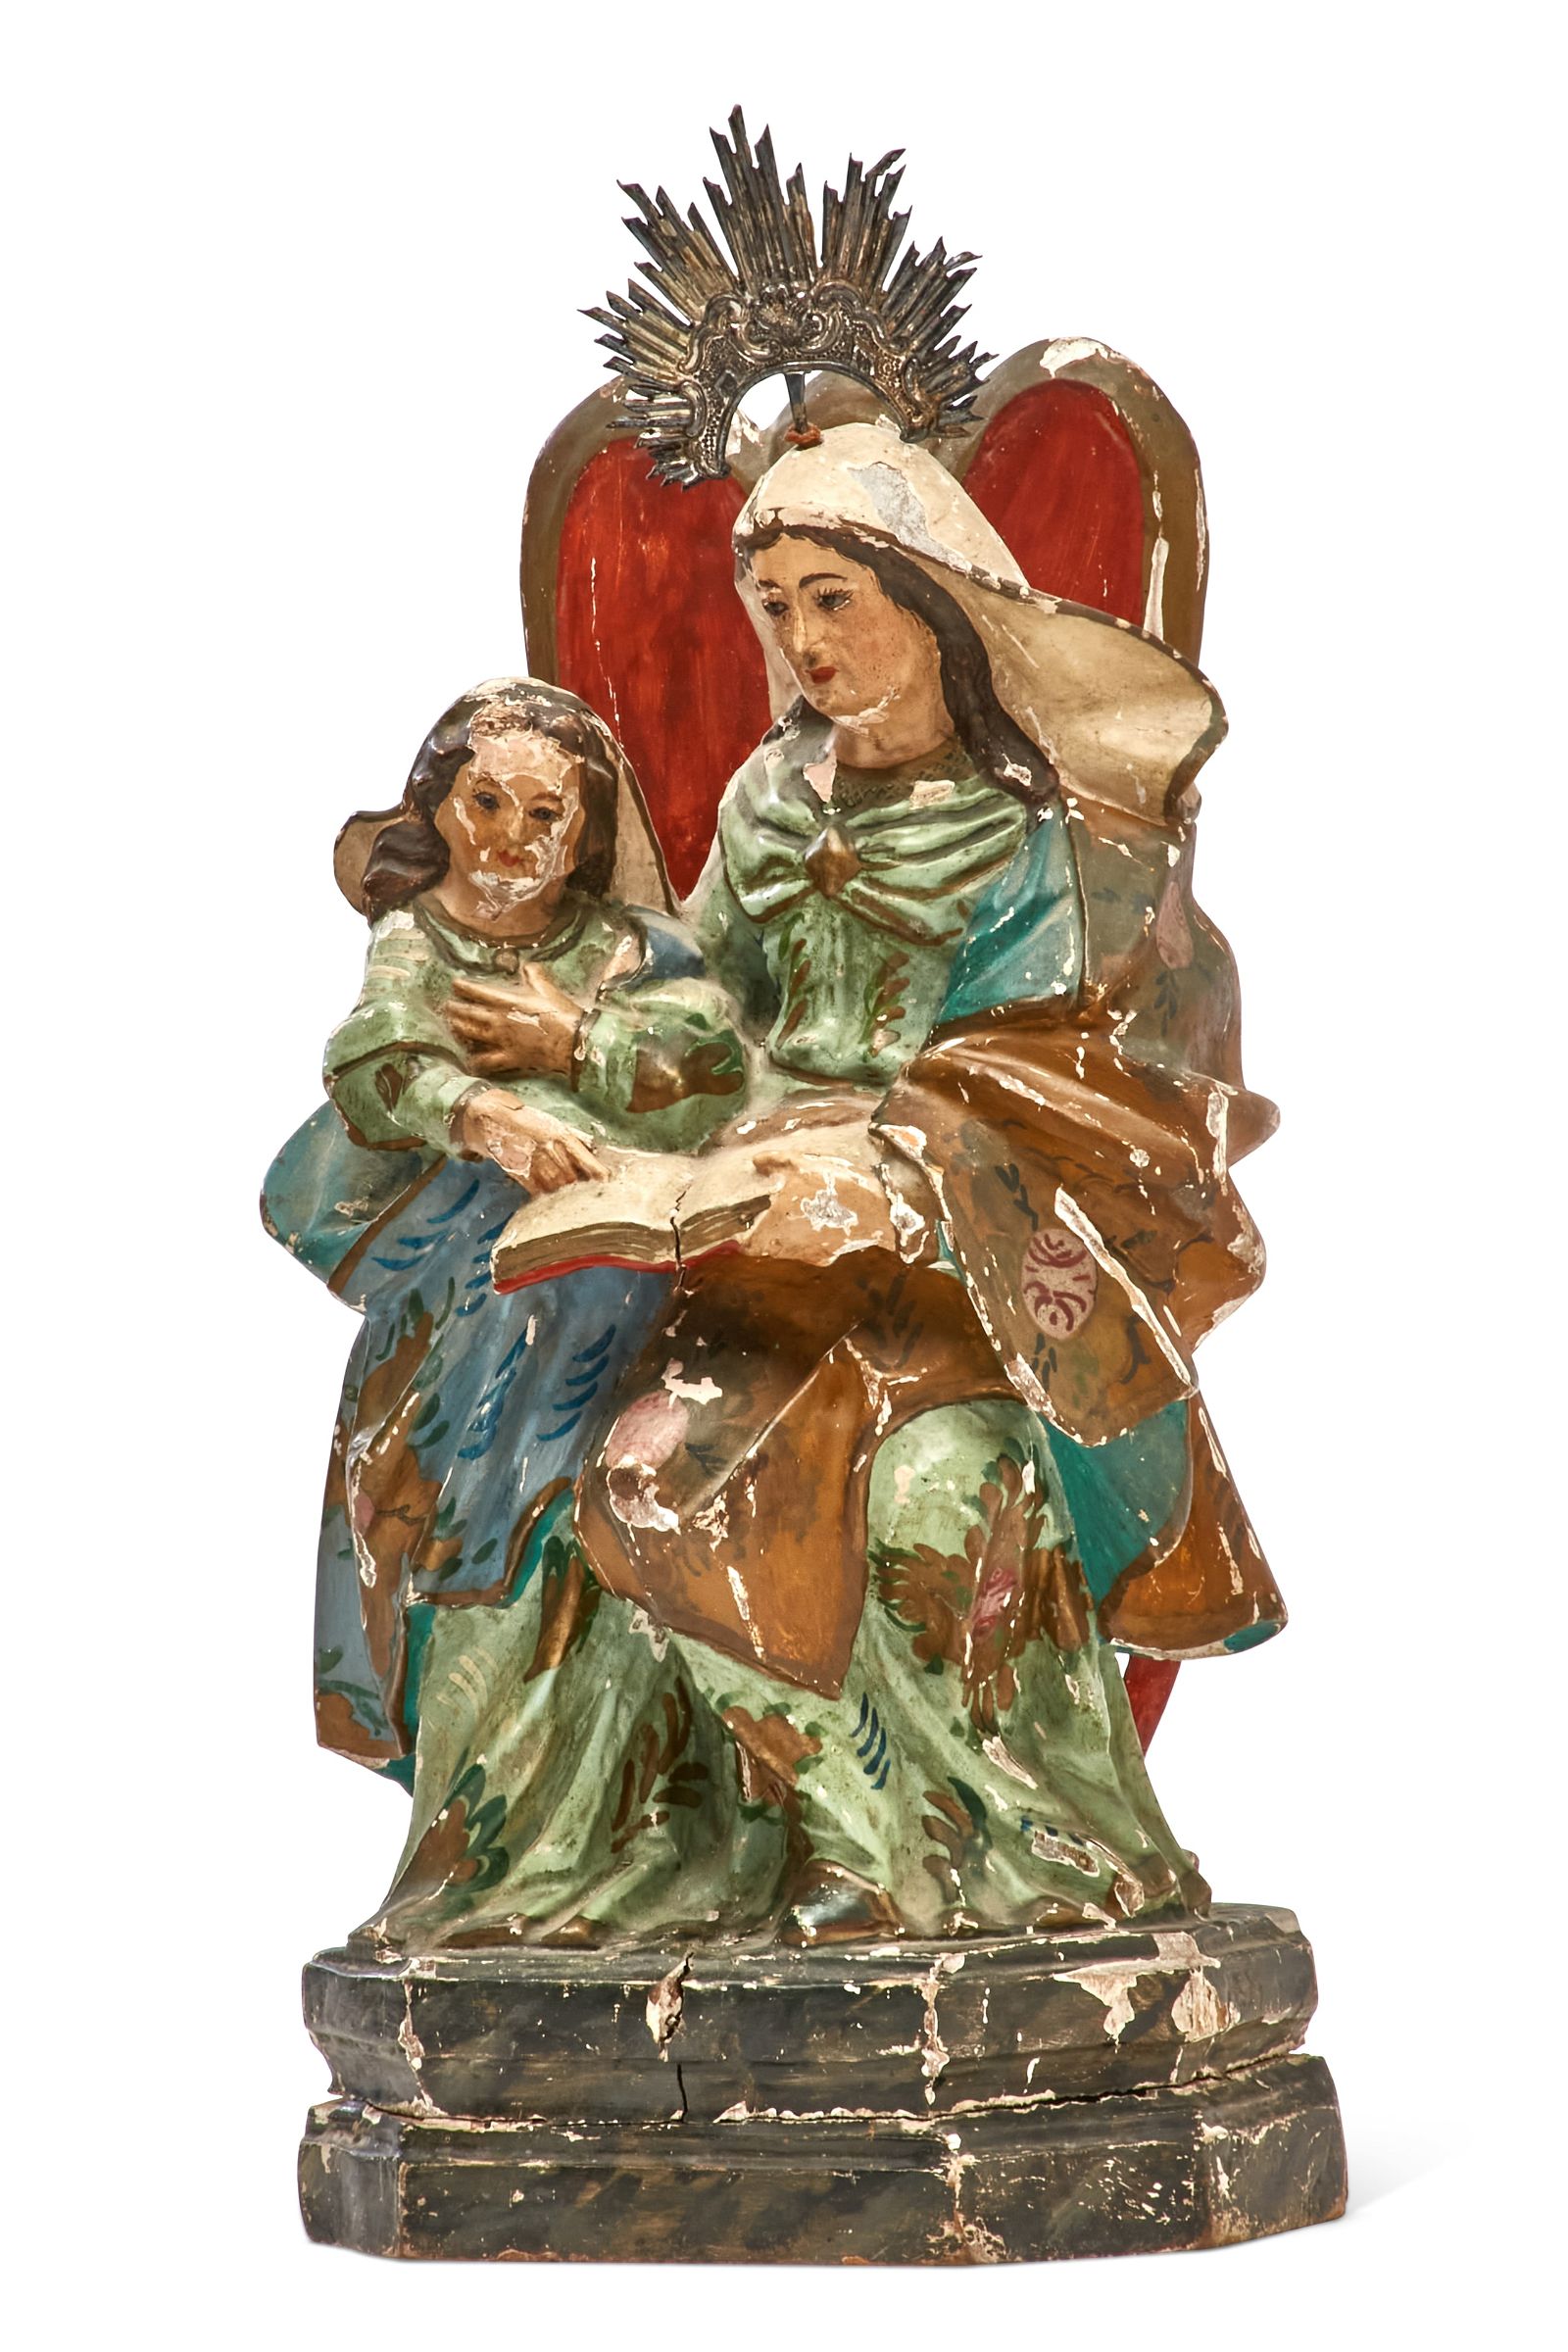 A SPANISH COLONIAL DECORATED FIGURAL